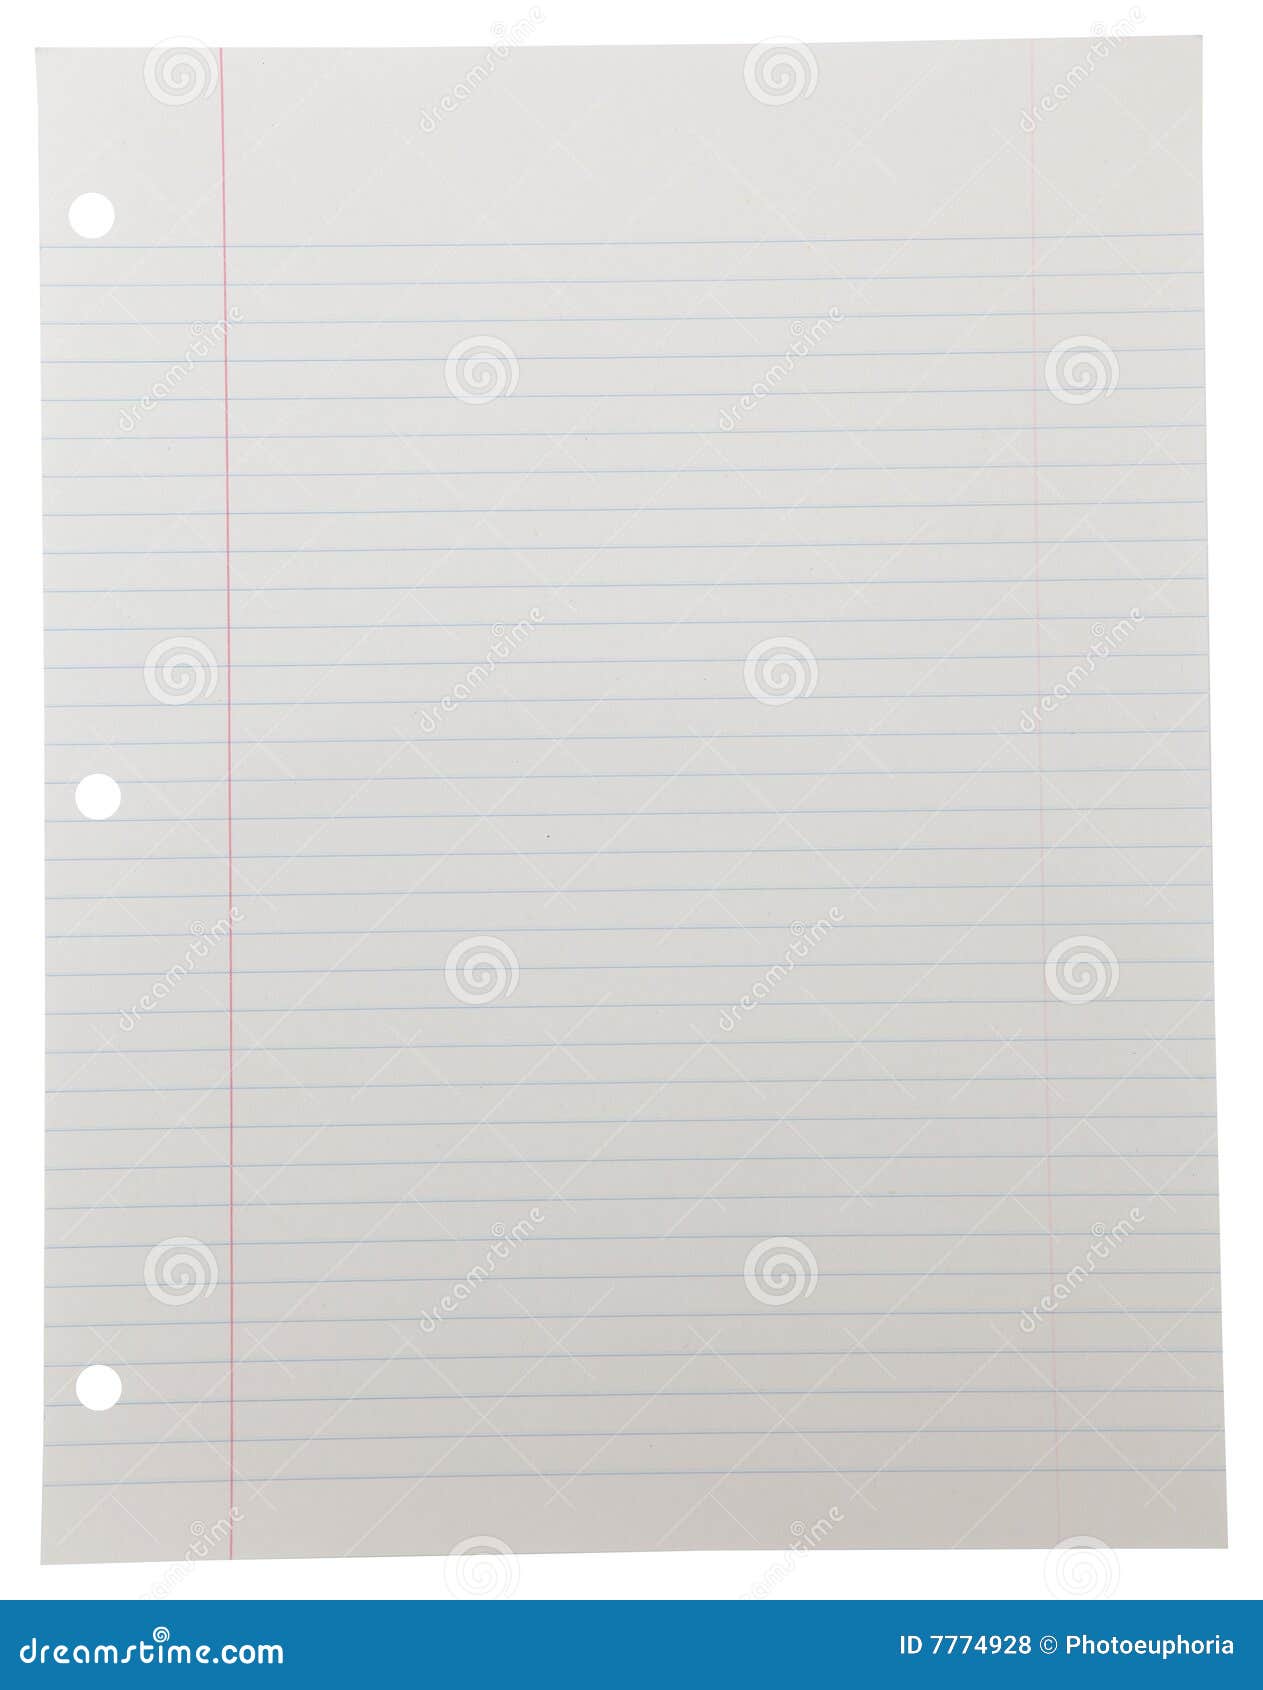 notebook paper on white